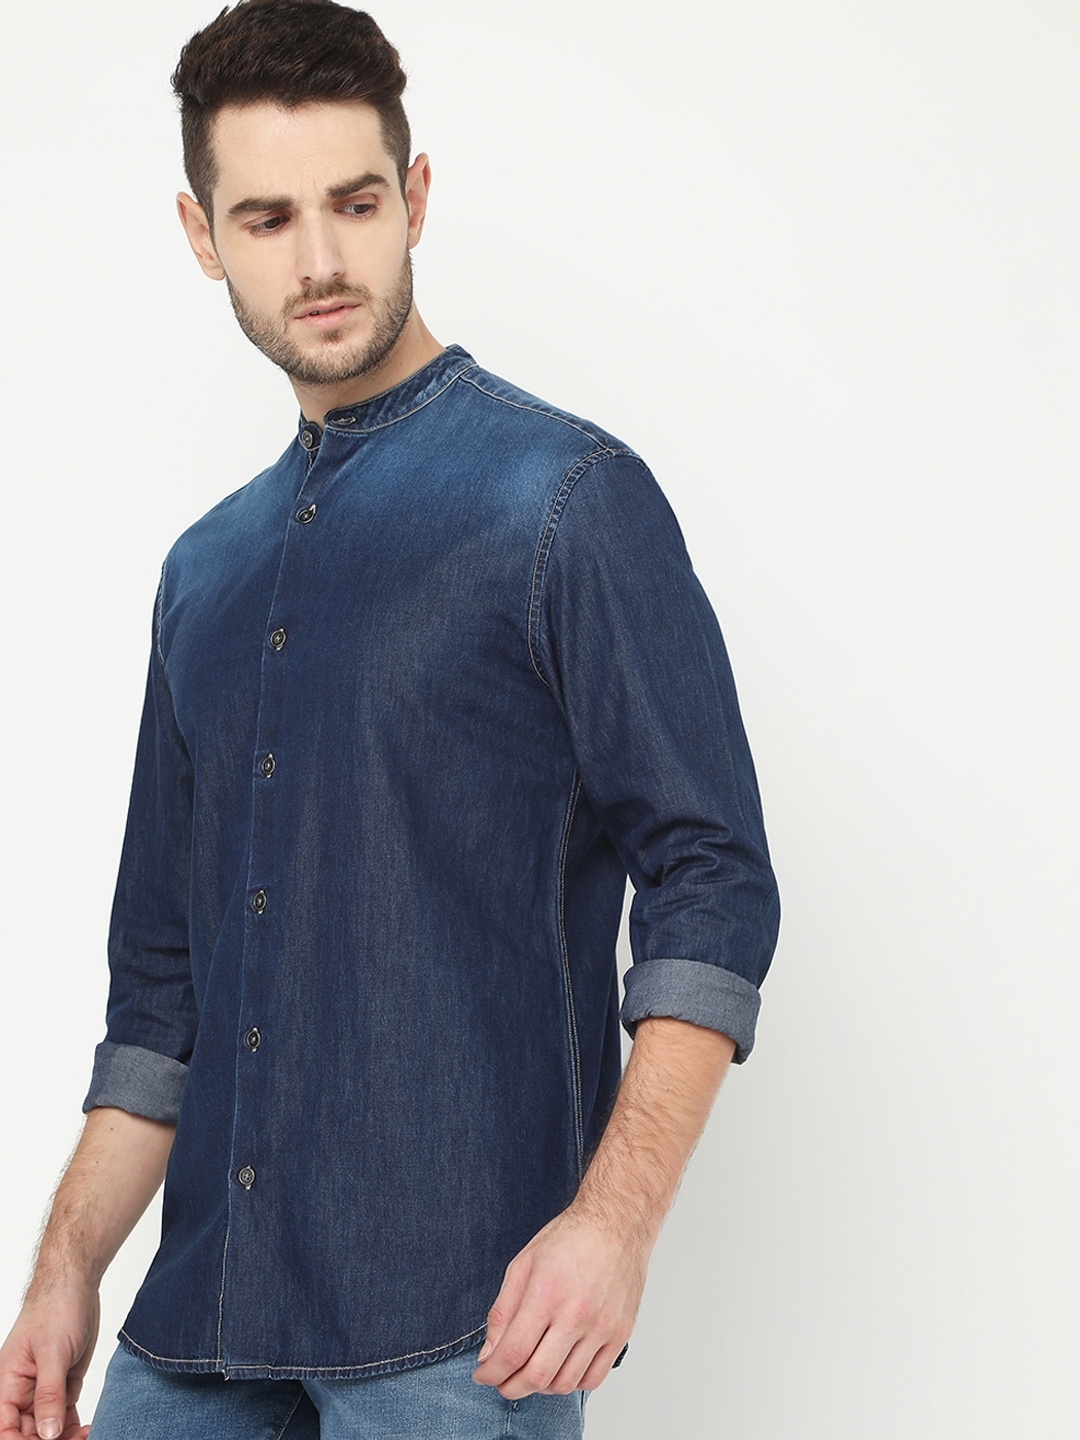 Buy Rad prix Teen Boys Blue Washed Denim Shirt Online In India At  Discounted Prices